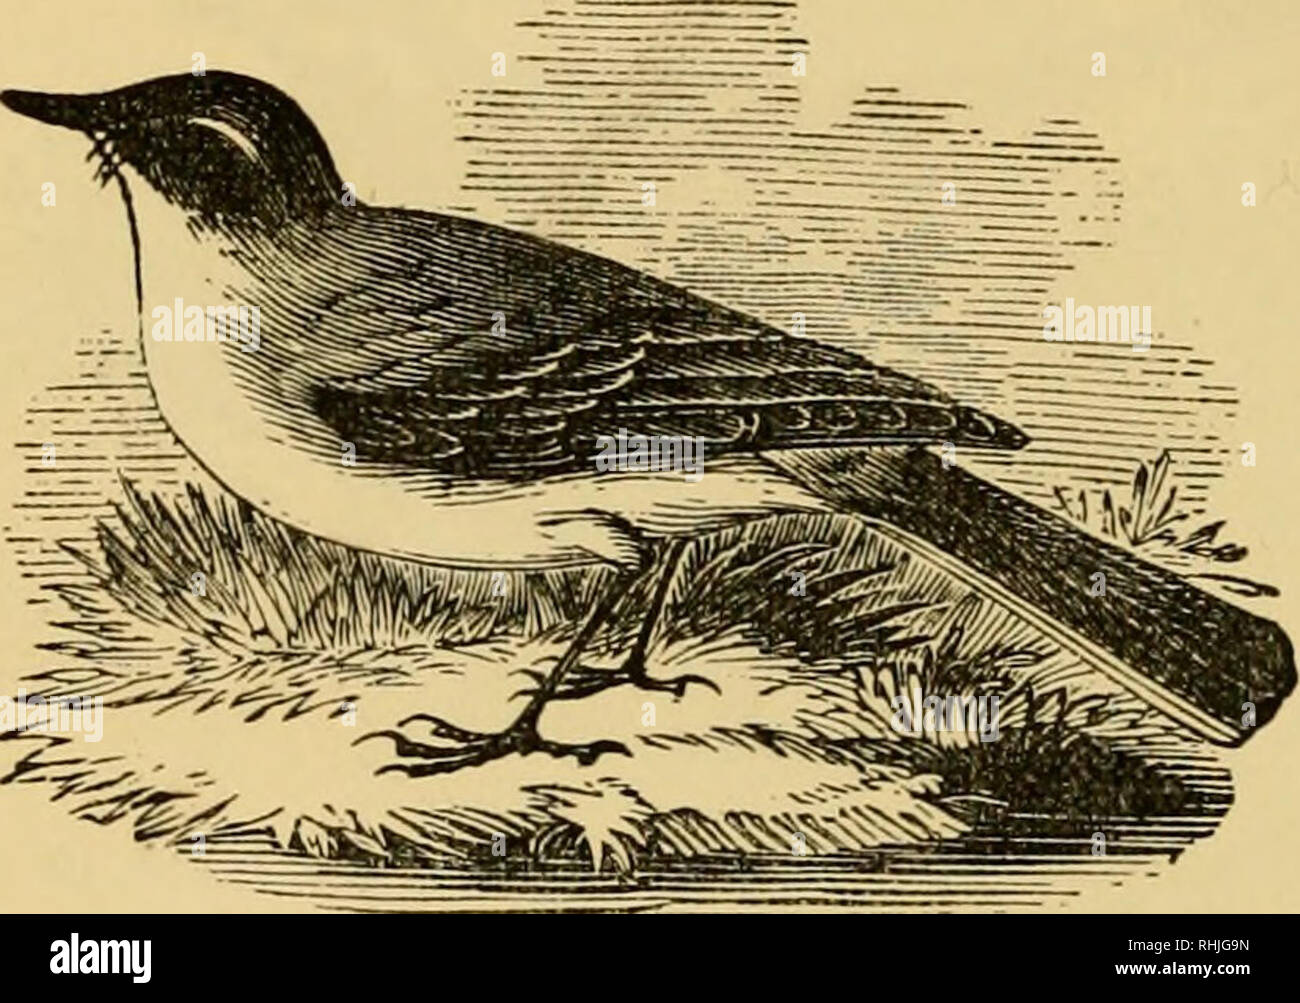 . The birds of Essex: a contribution to the natural history of the country. Birds. 98 THE BIRDS OF ESSEX. At Epping and at Sudbury Edward Doubleday and W. D. King respect- ively record it (15 &amp; 20) as &quot;a winter visitant.&quot; Henry Doubleday writes to T. C. Heysham in 1831 (10), &quot; The Grey Wagtail is very rare here, and I never could get one in summer plumage.&quot; Mr. Buxton says (47. 89) it is &quot; not uncommon along the Roding in winter.&quot; Round Orsett, it is uncommon, being only occasionally seen, and never breeding (Sackett). It occurs in both the Col- chester and Pa Stock Photo